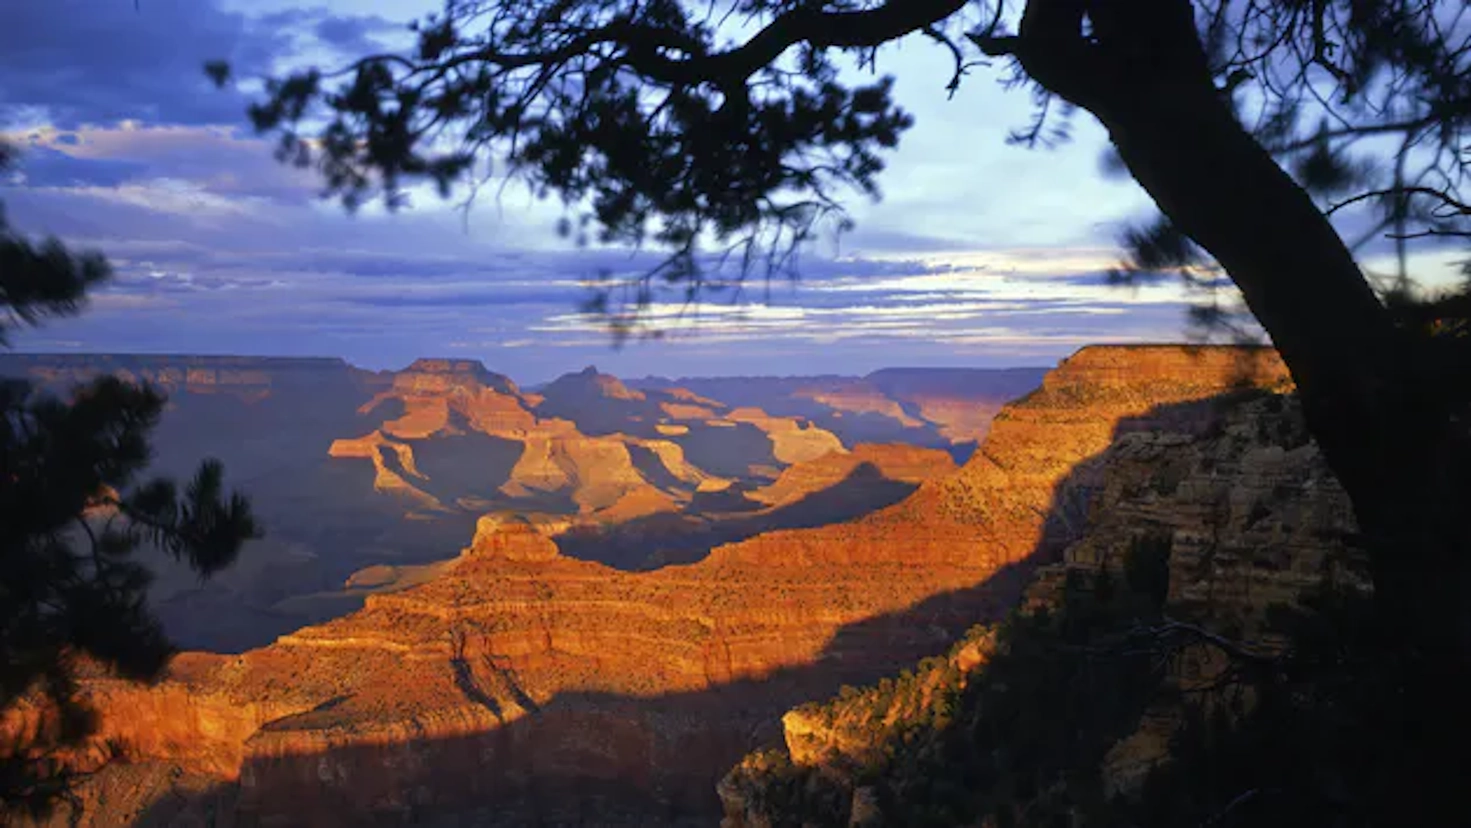 Choose The Signature Sunset Grand Canyon Private Tour, an amazing 13 passenger hummer adventure and learn about the American Southwest and ancient inhabitants, discover nature, how the Grand Canyon came to be, and much more.